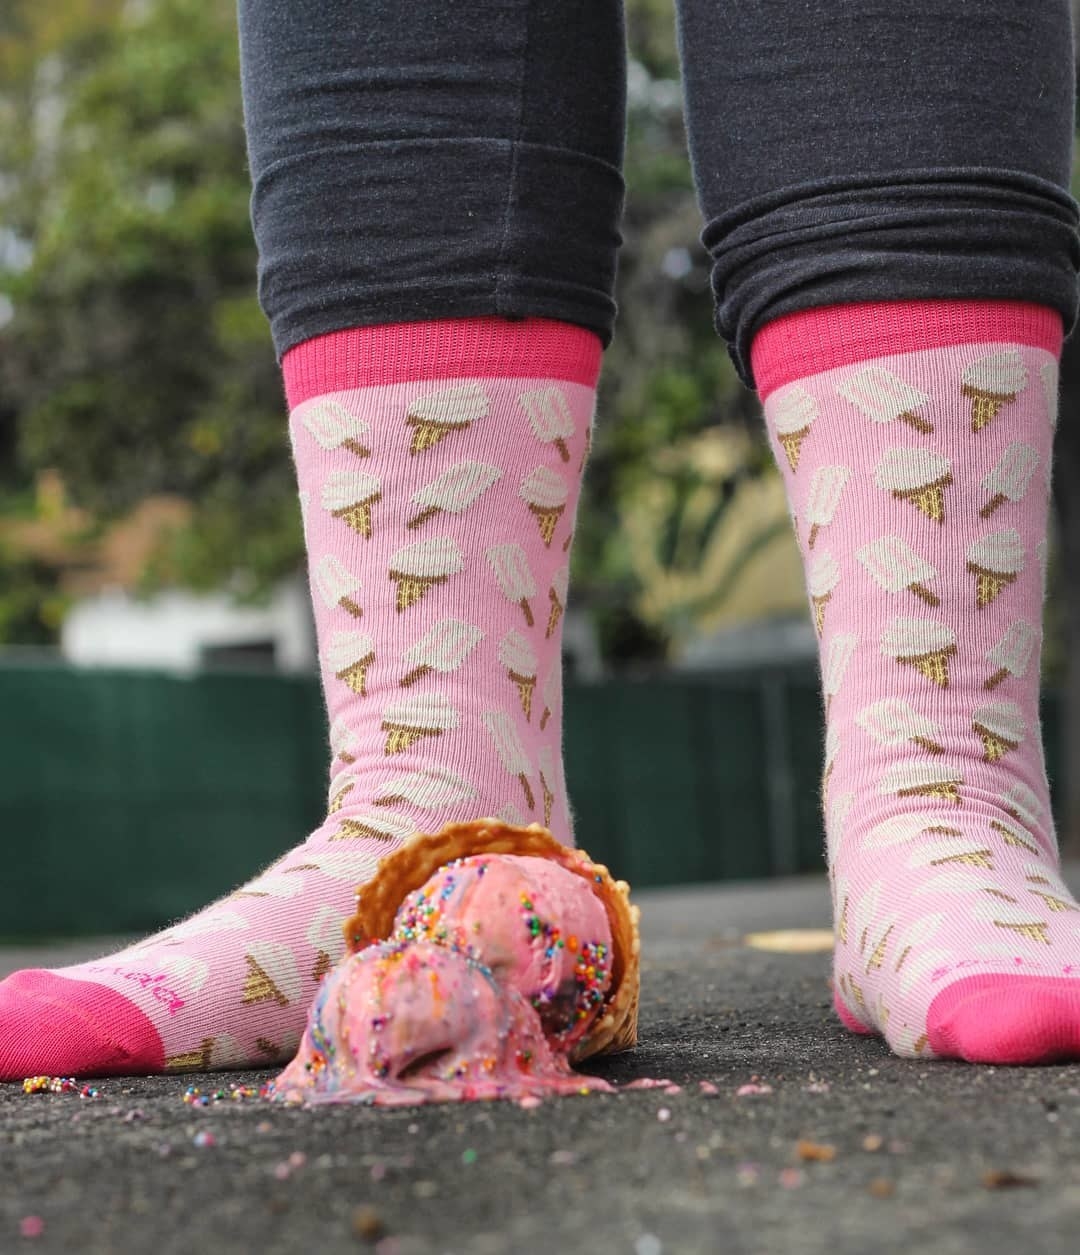 21 Pairs Of Socks So Cute You'll Want To Wear Them With Sandals